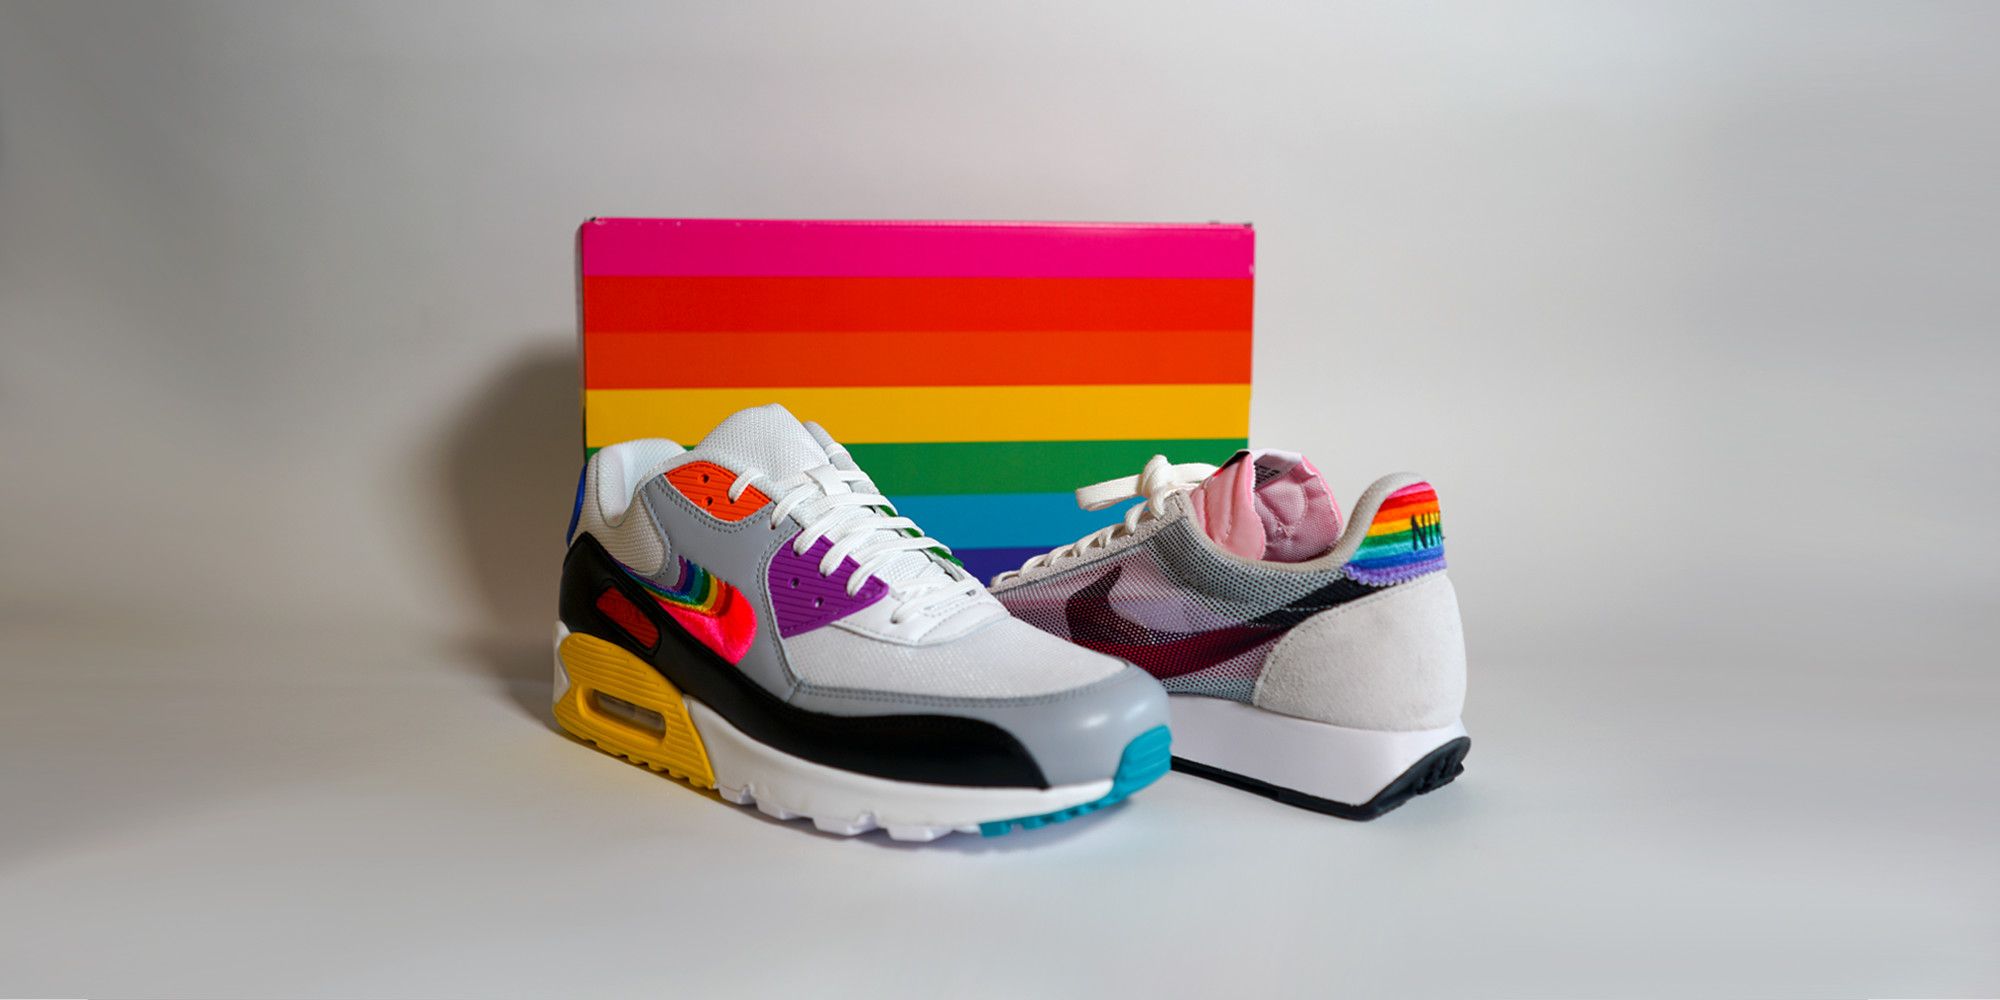 Nike BETRUE Air Max 90 and Tailwind 79 Sneakers - The Story of 